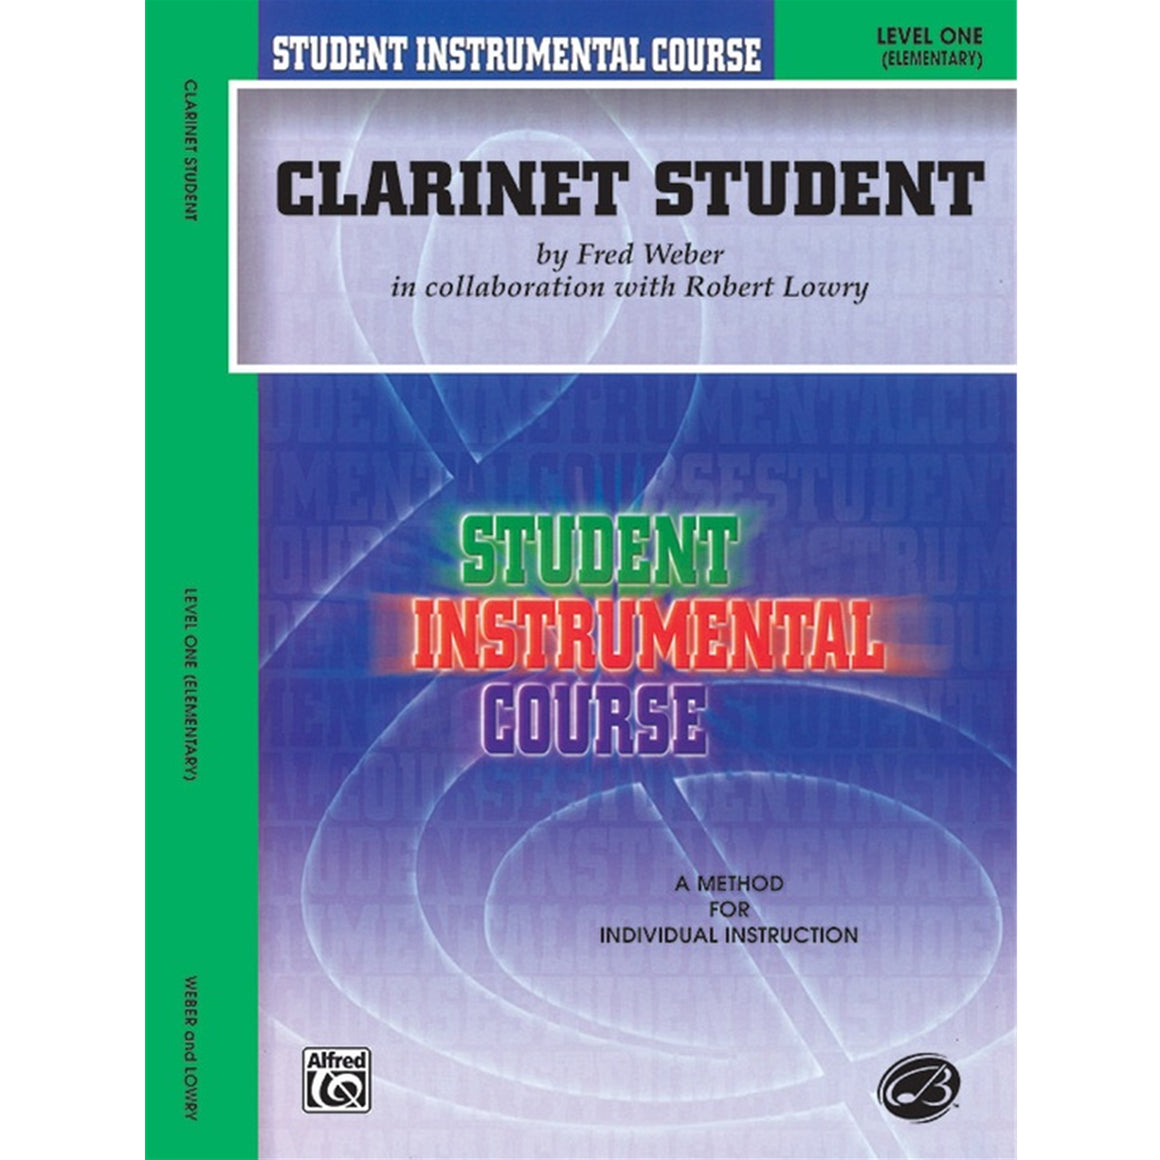 ALFRED BIC00106A Student Instrumental Course: Clarinet Student, Level I [Clarinet]